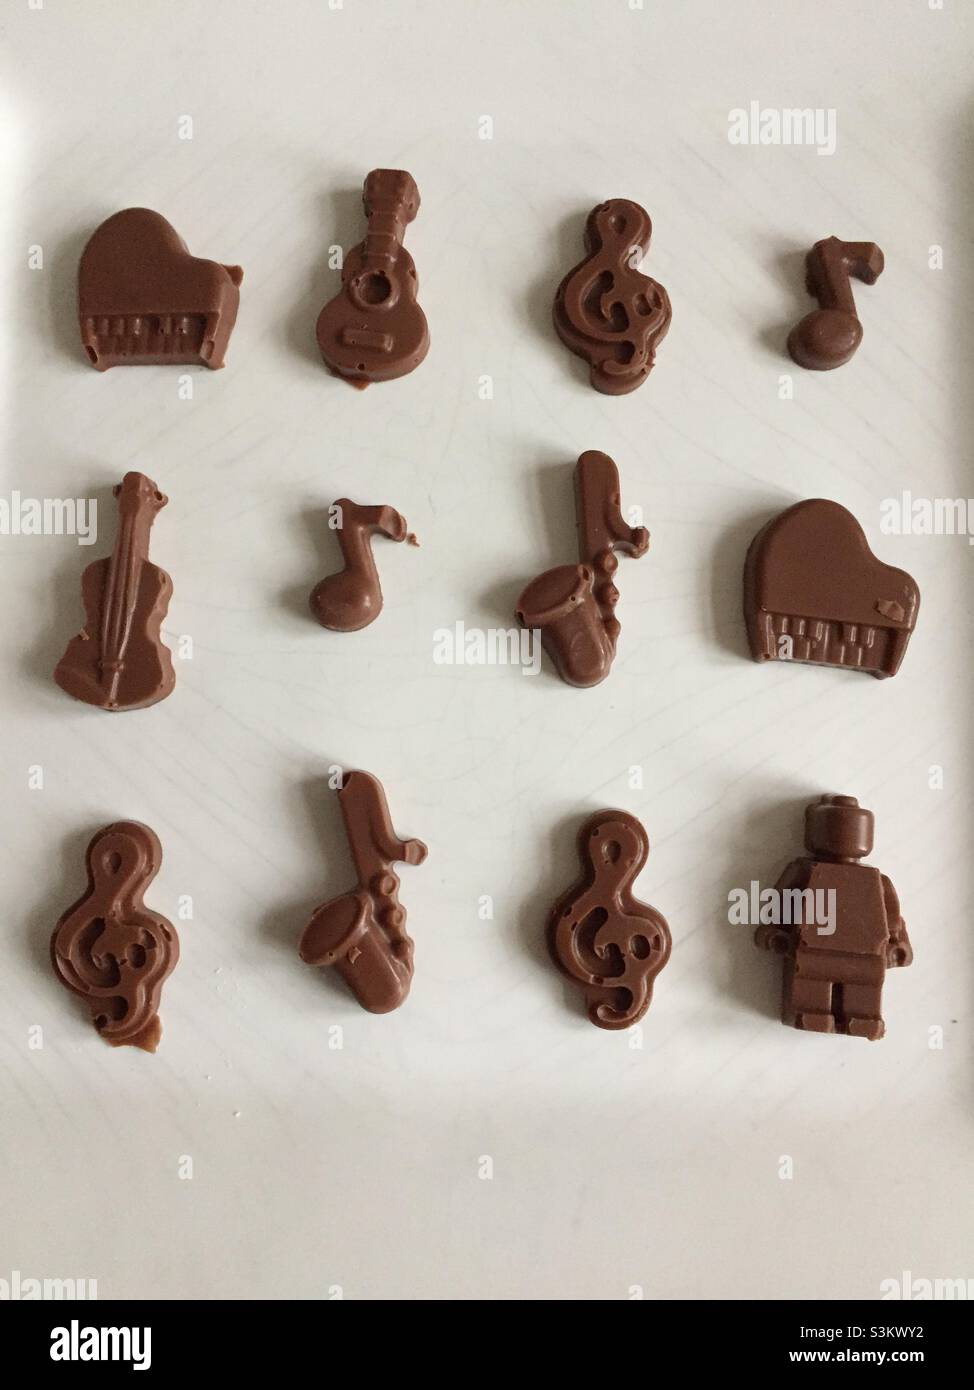 Musical chocolate shapes on a white plate Stock Photo